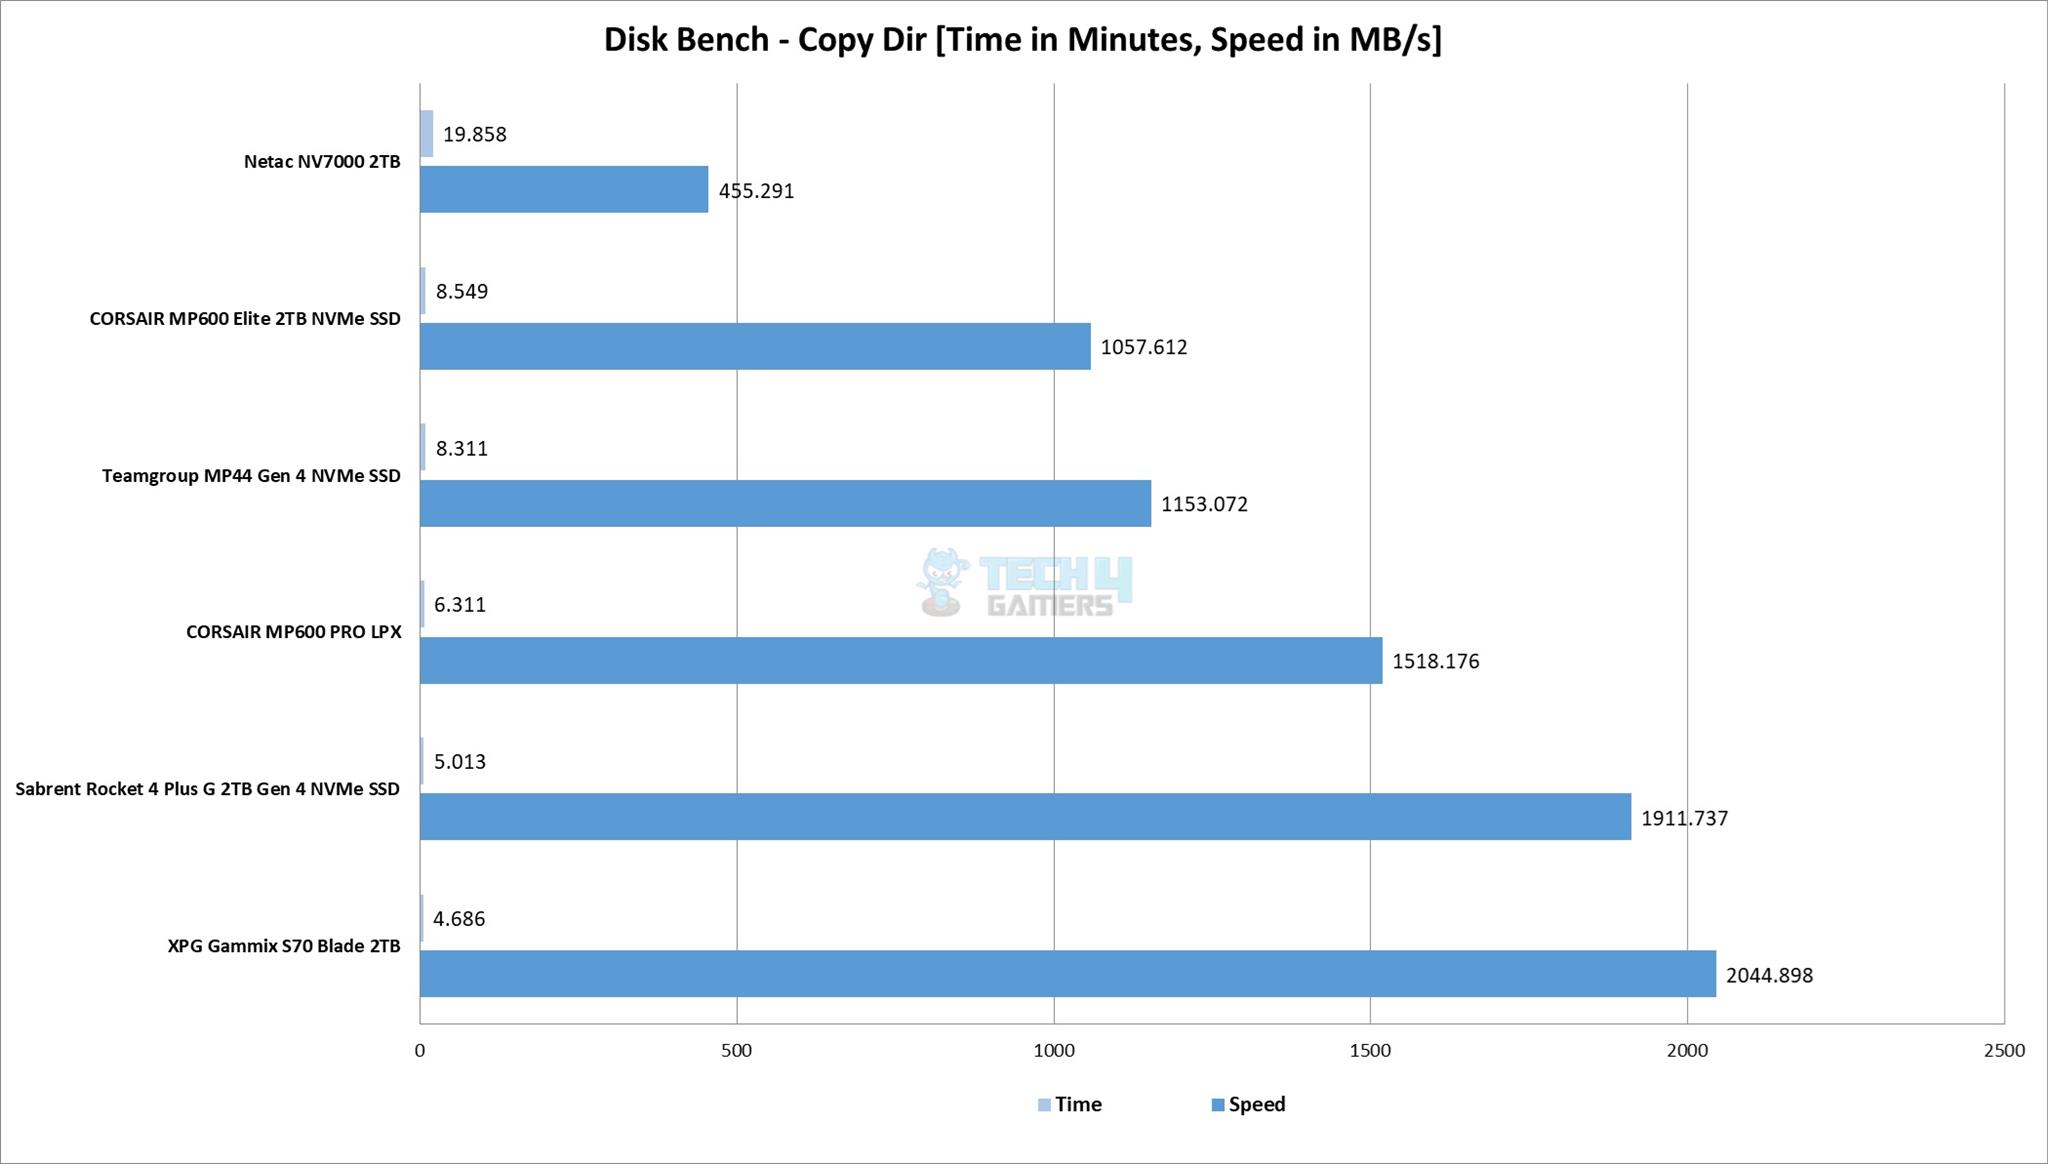 Disk bench - Copy Dir (Image By Tech4Gamers)